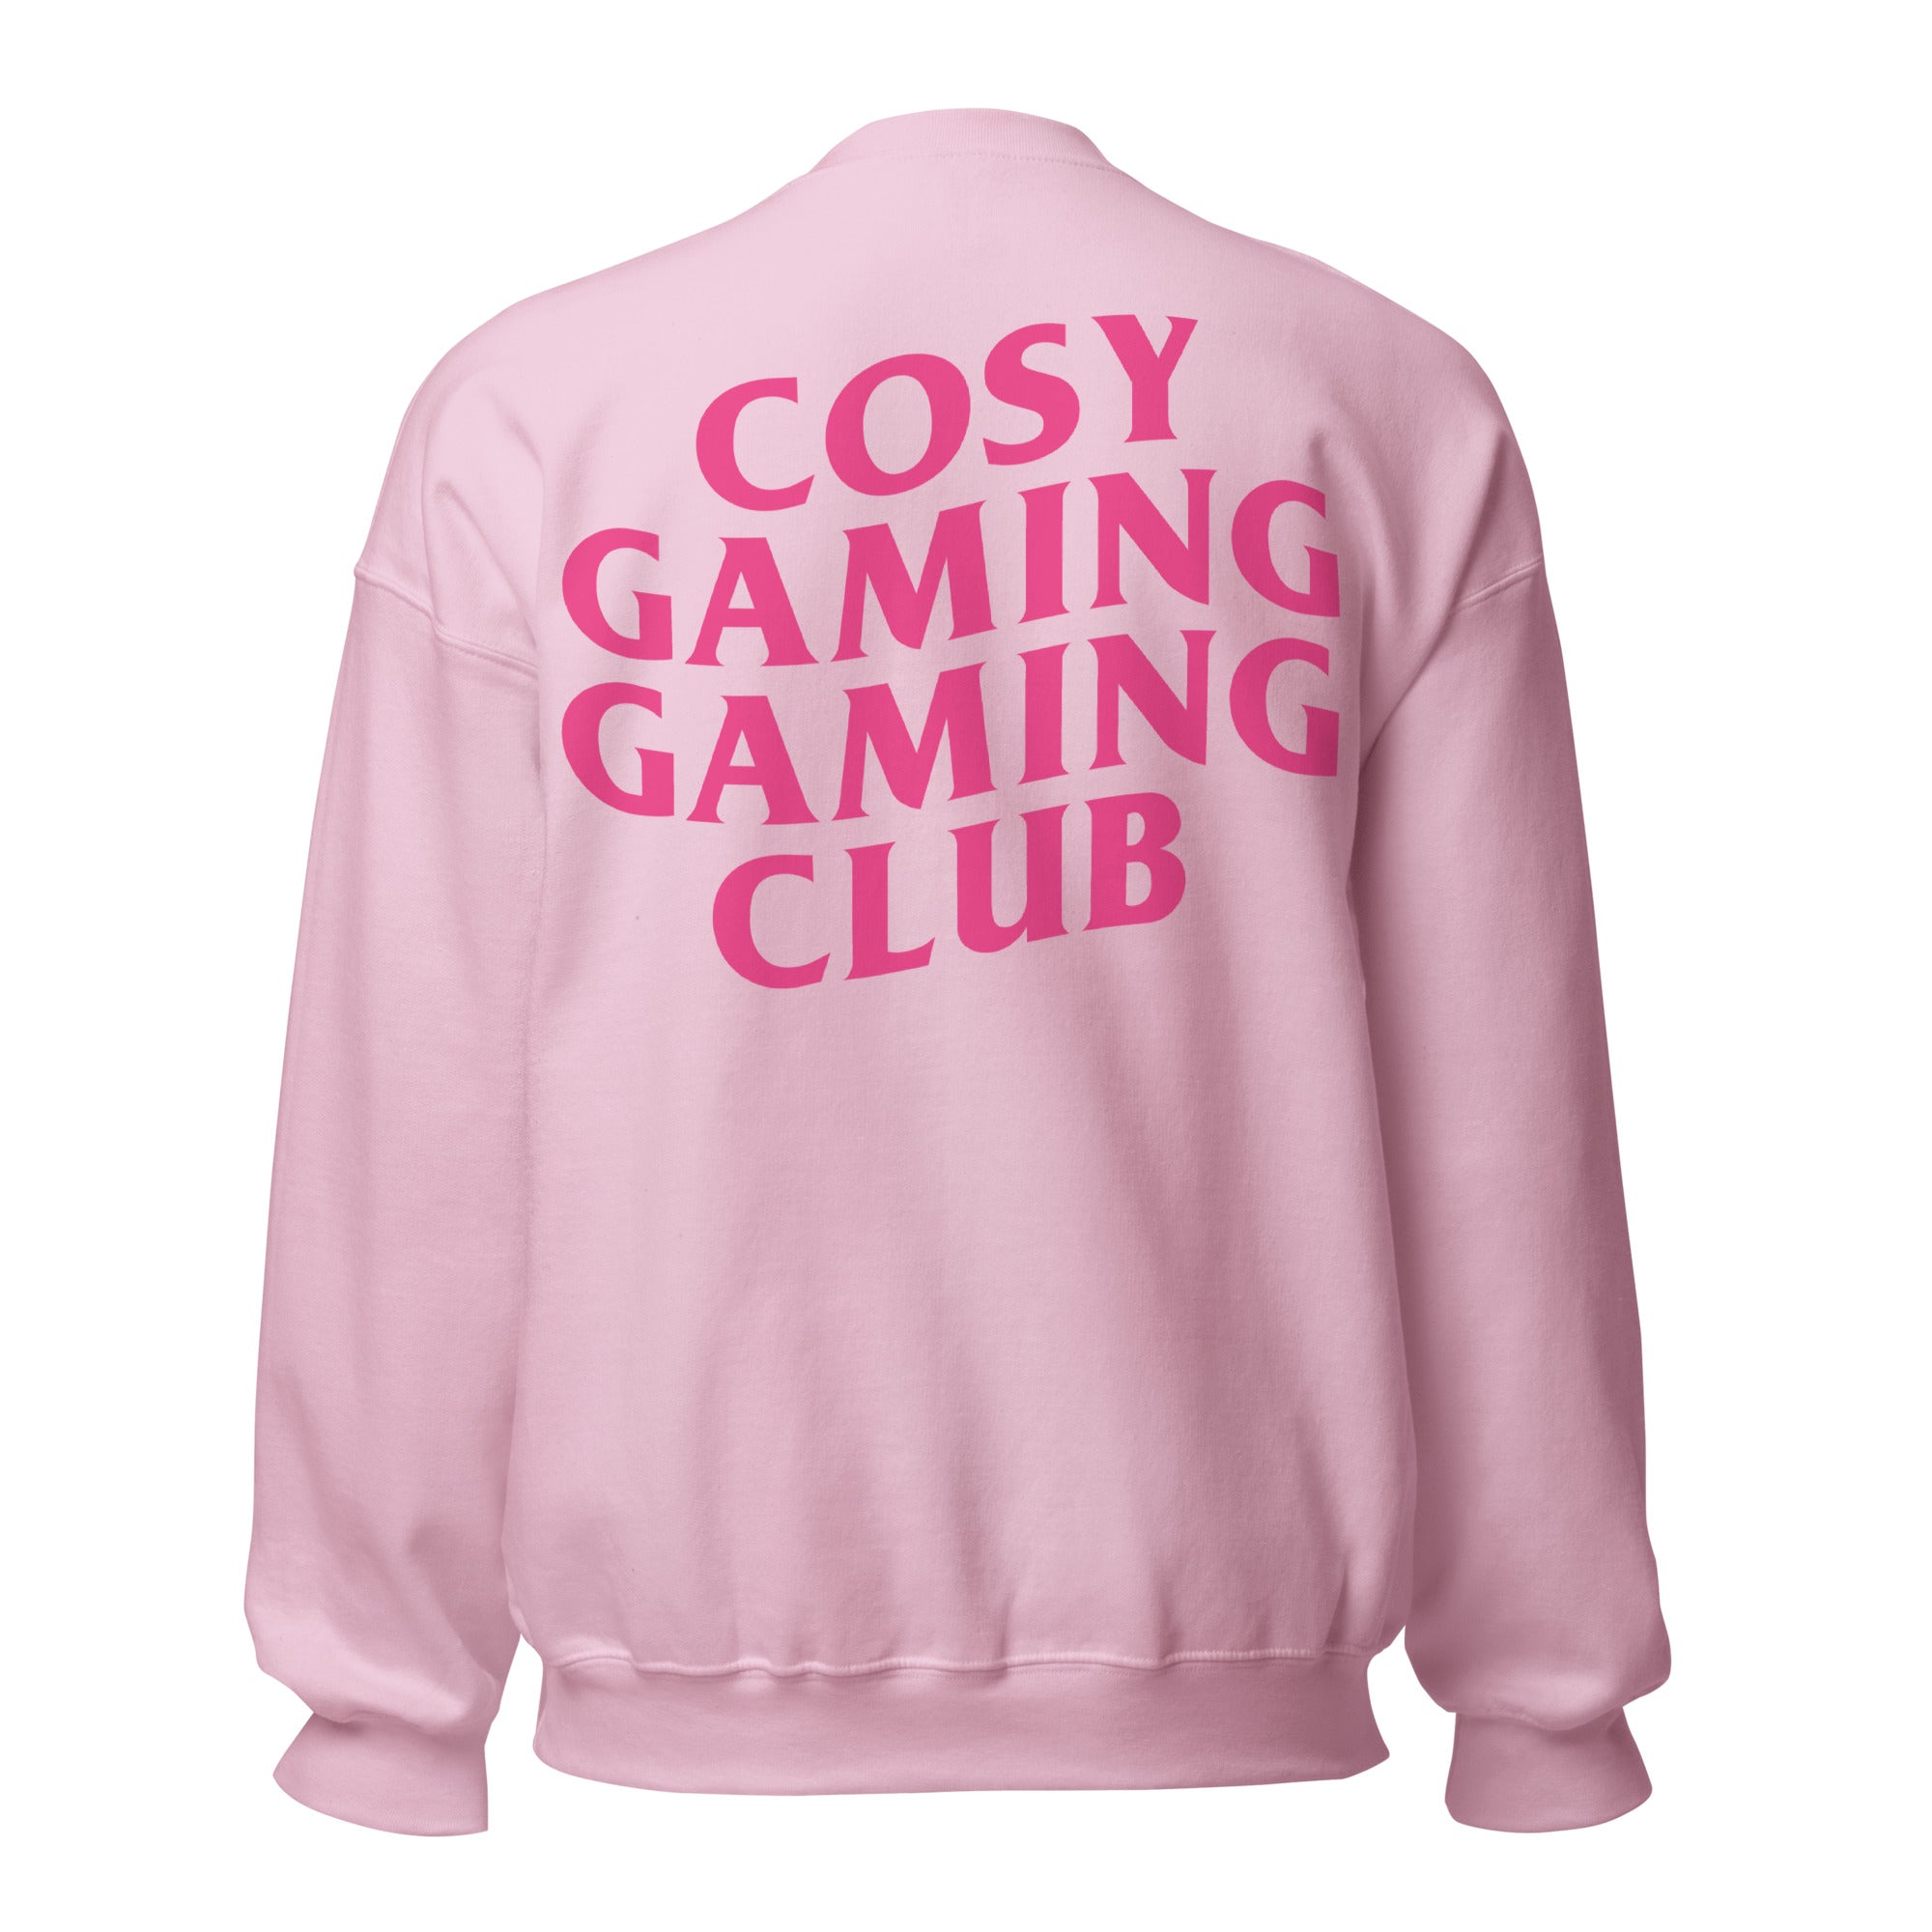 Cosy Gaming Club Embroidered Sweatshirt